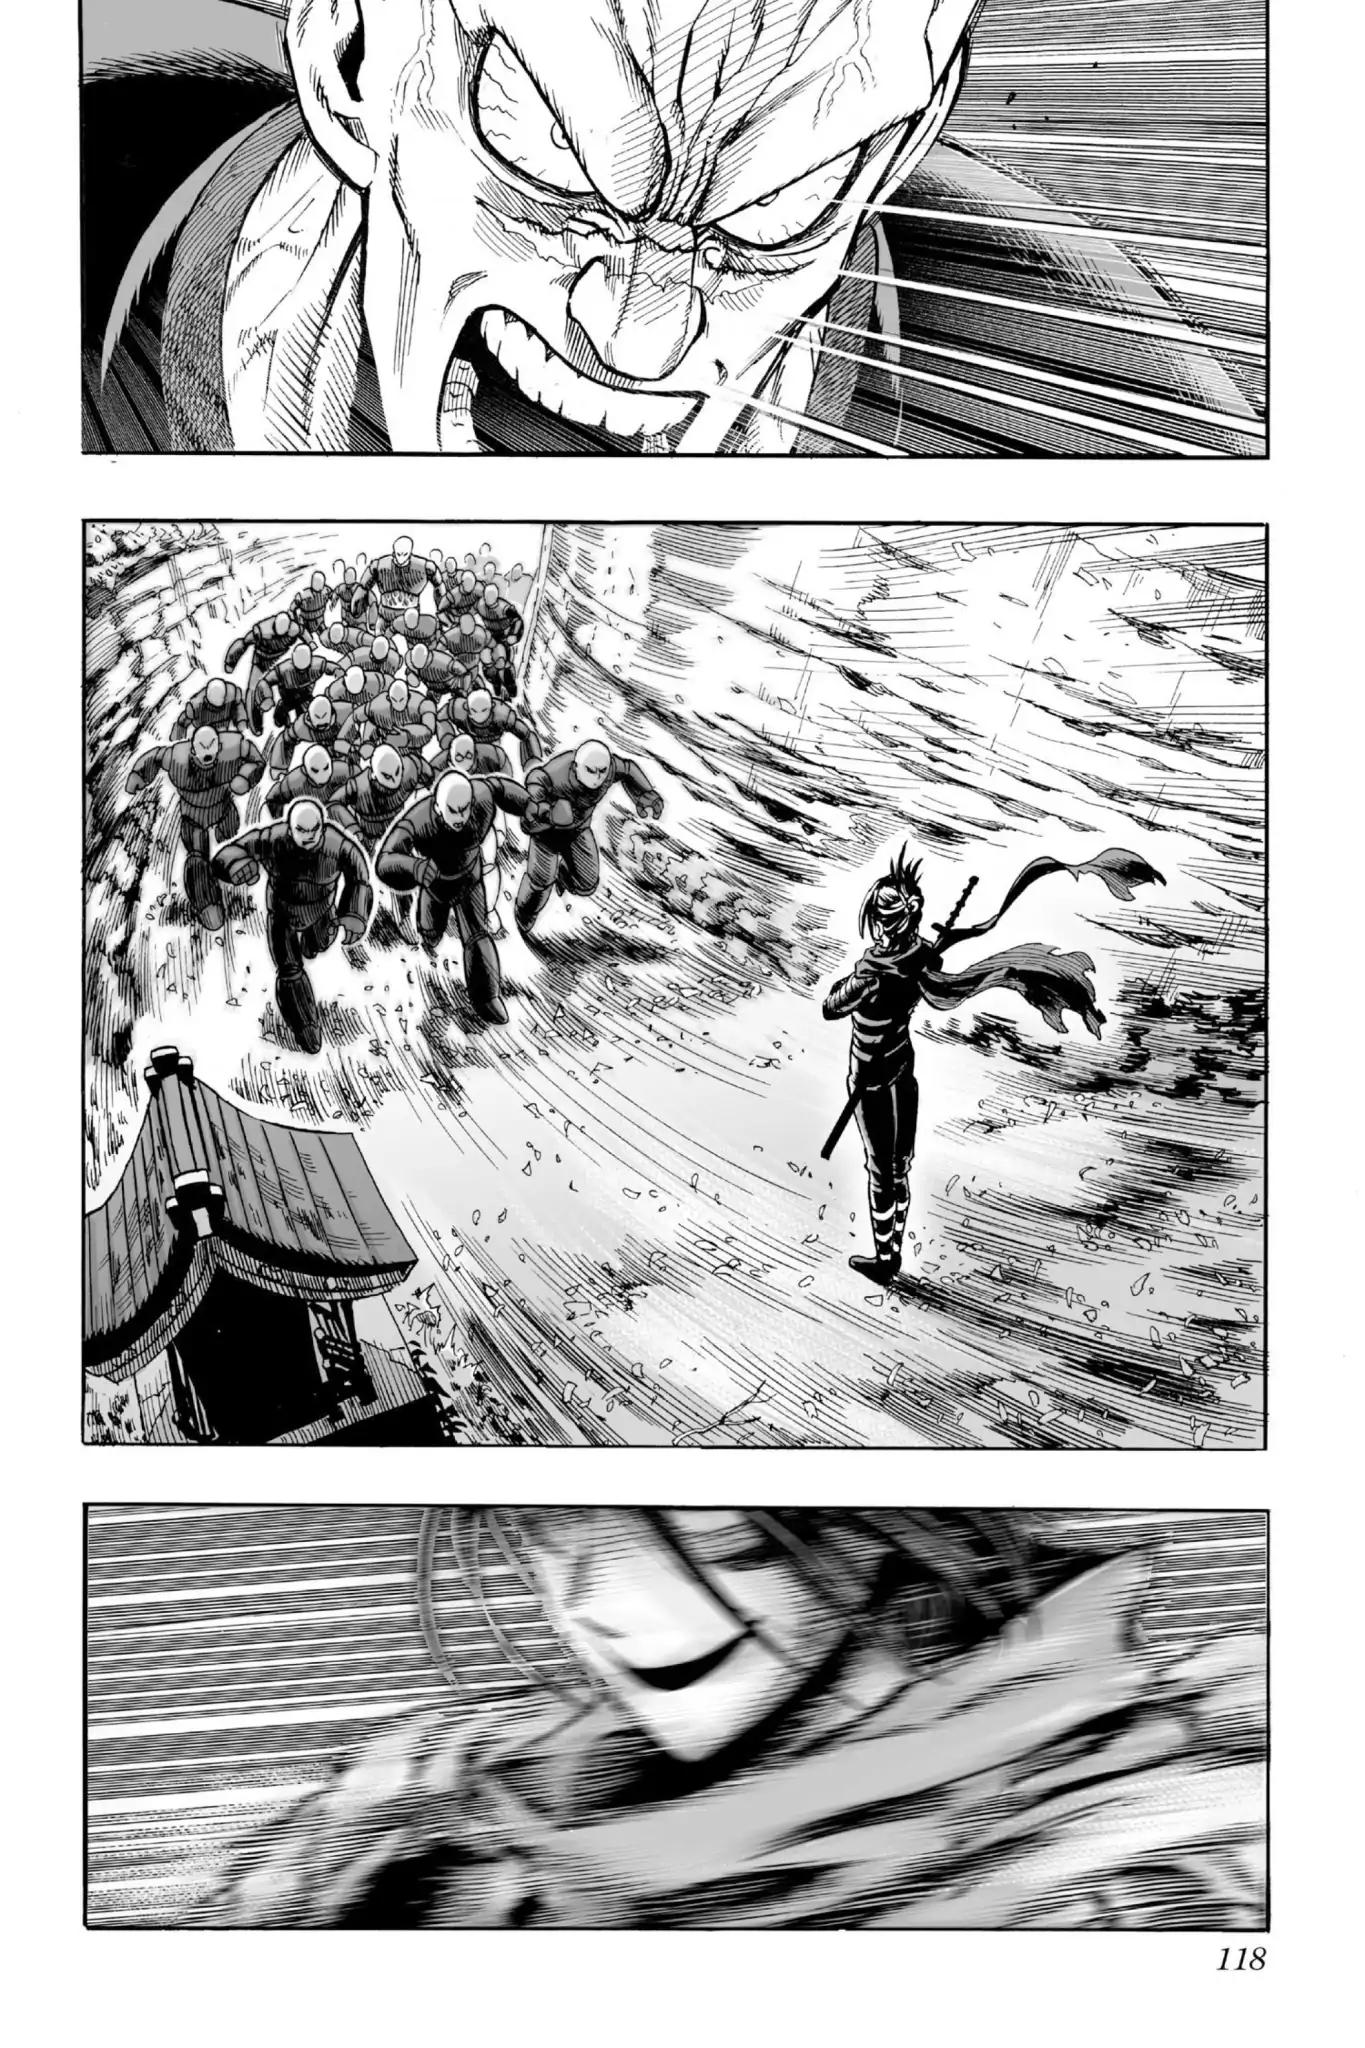 One-Punch Man chapter 13 page 2